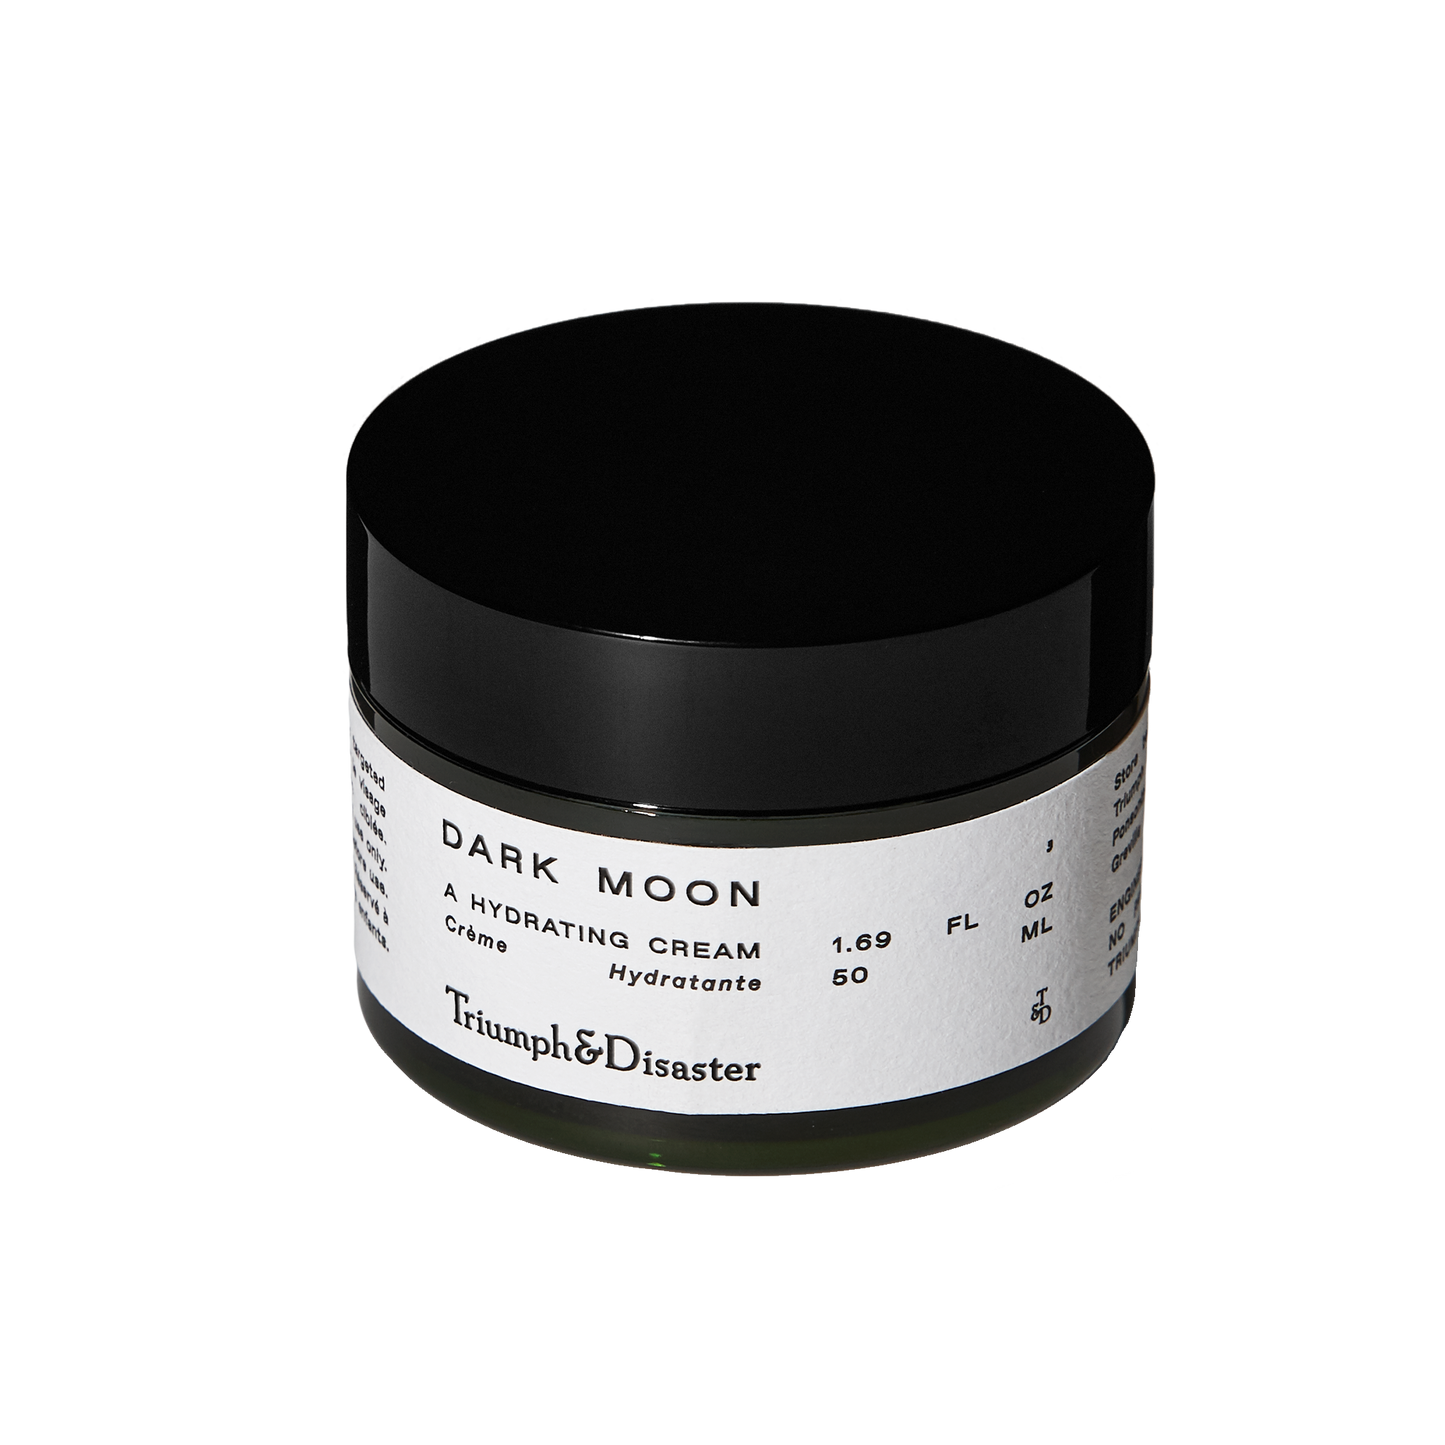 Triumph and Disaster Dark Moon Hydrating Cream: The dark moon is invisible to Earth, silent and hidden in shadow, a deep breath taken before each lunar cycle. ‘Dark Moon’ by Triumph & Disaster represents this concept of reflection and recovery and is designed to work with our body’s natural rhythm. A scientifically engineered hydrating cream, Dark Moon utilizes Vitamin C, Olive and Horopito to facilitate healthy, vibrant skin; working silently and naturally in the deep hours before dawn.